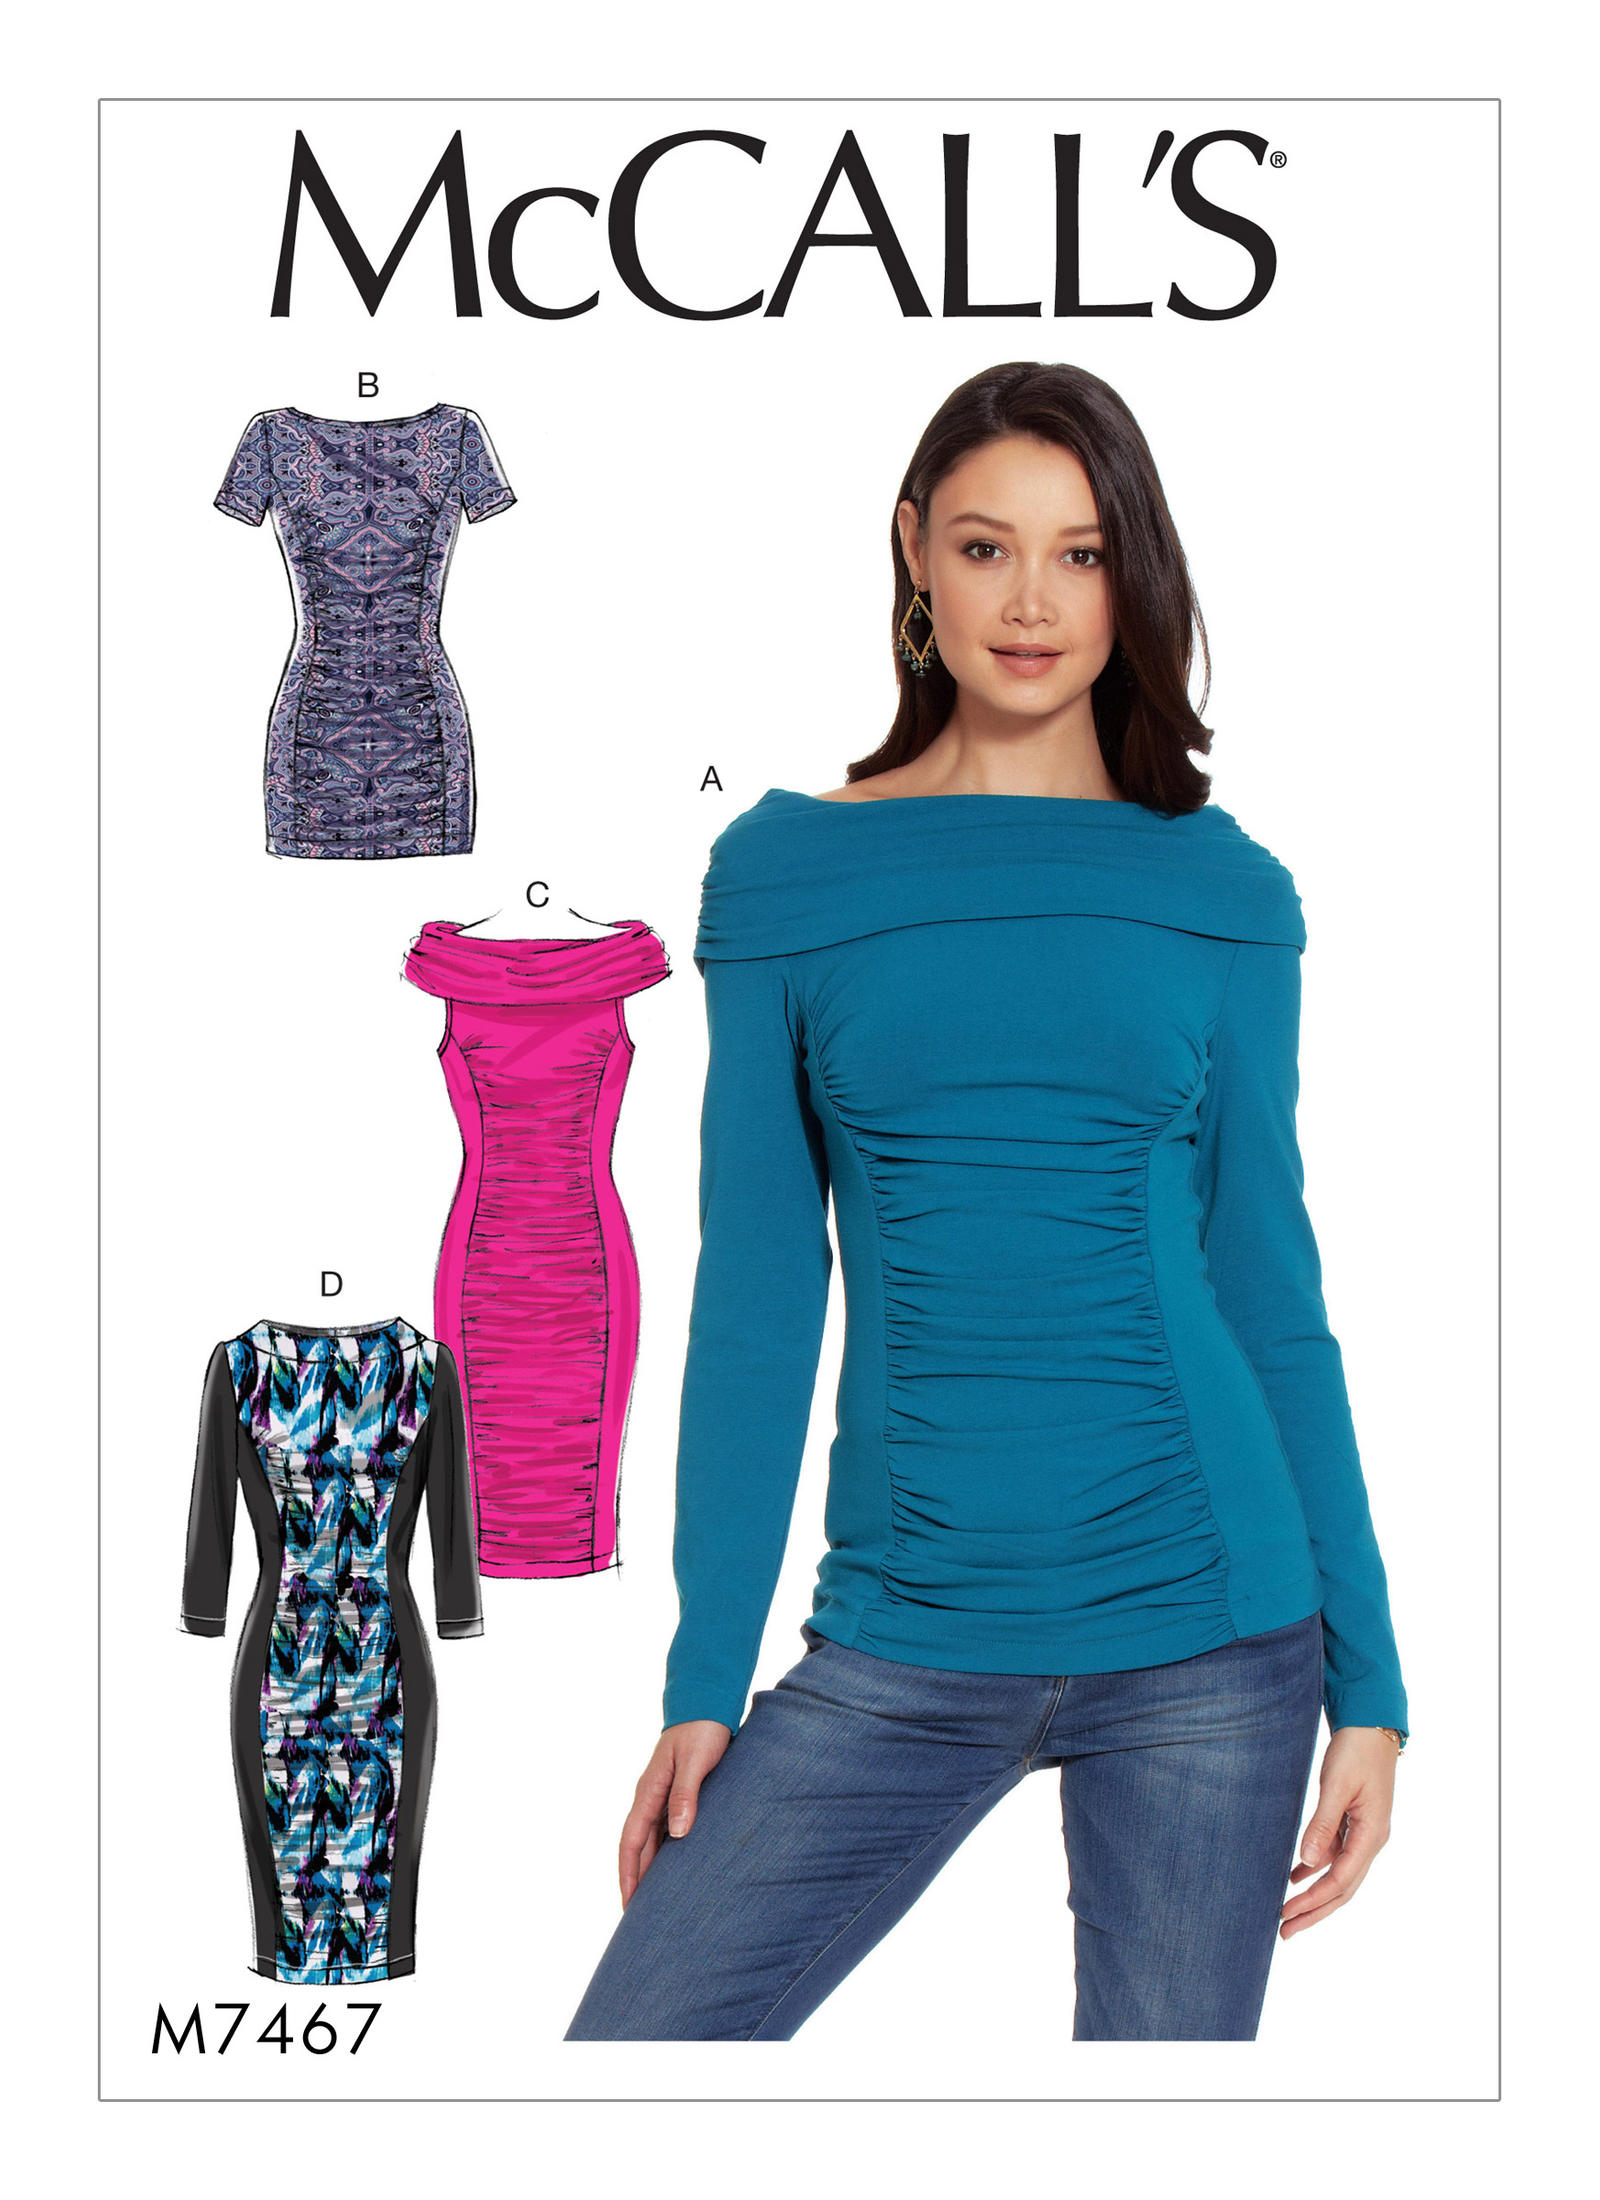 McCall's 7467 Misses' Ruched and Paneled Top, Tunic and Dresses